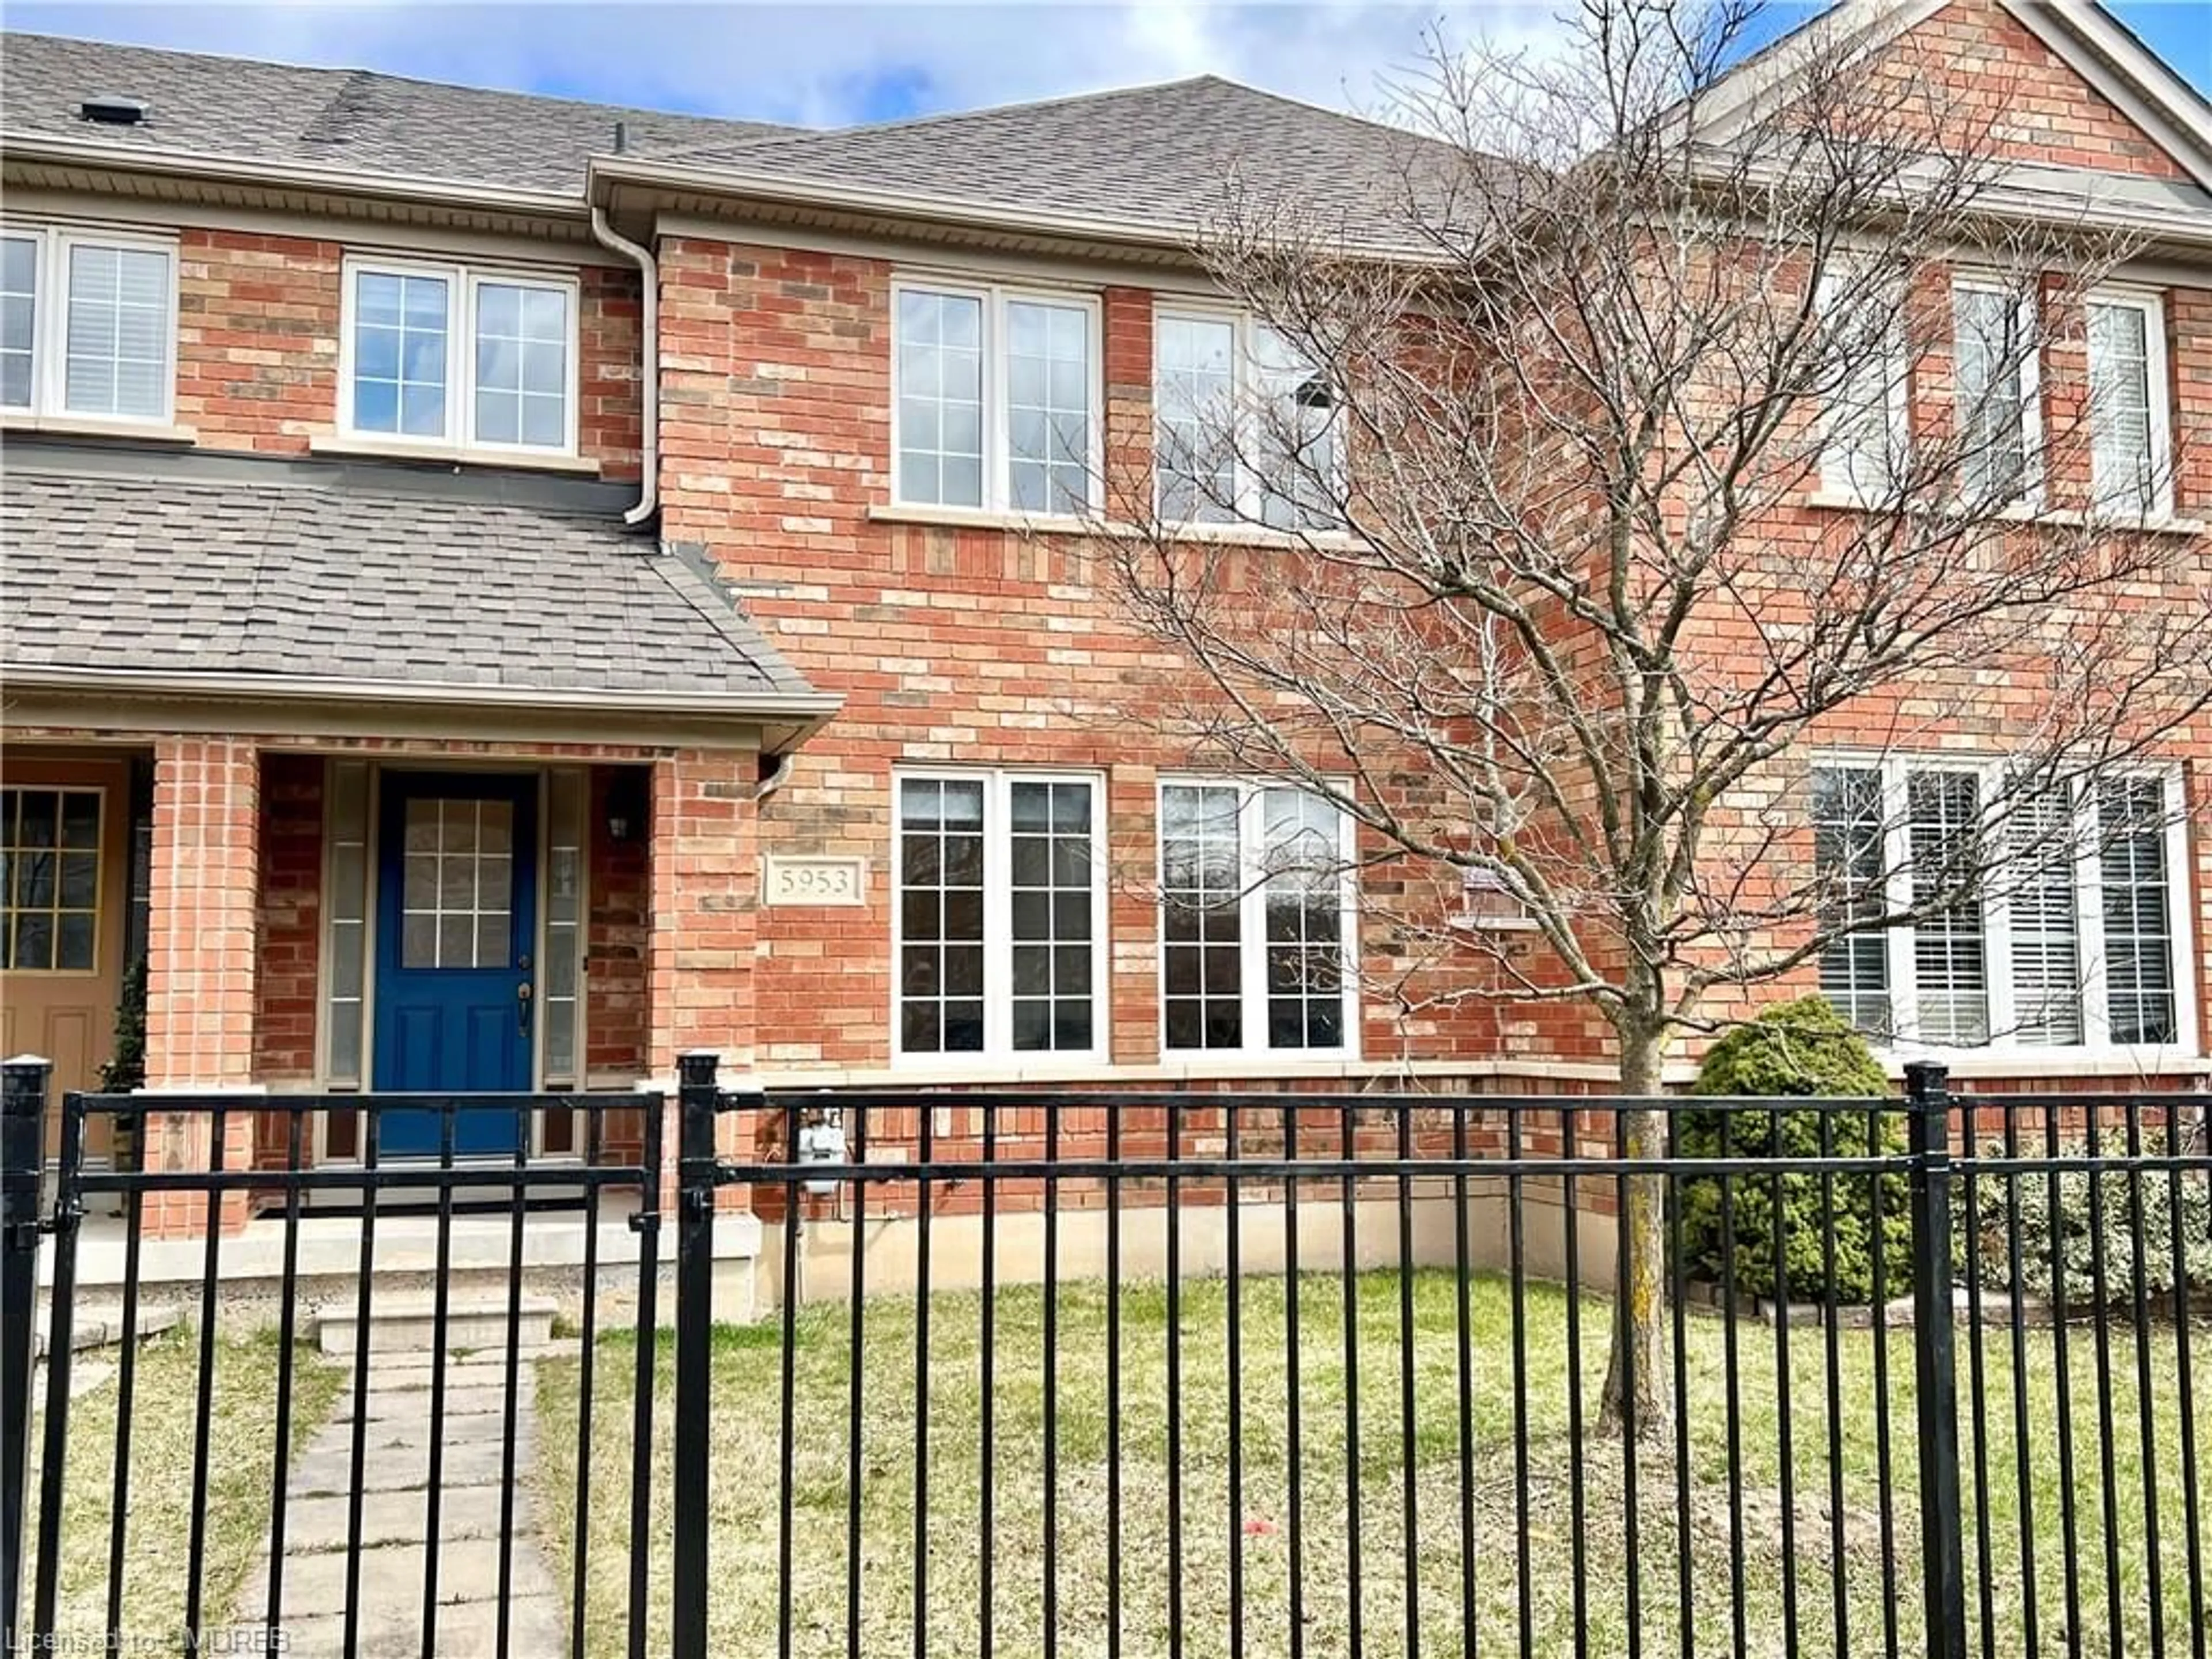 Home with brick exterior material for 5953 Tenth Line, Mississauga Ontario L5M 6K7